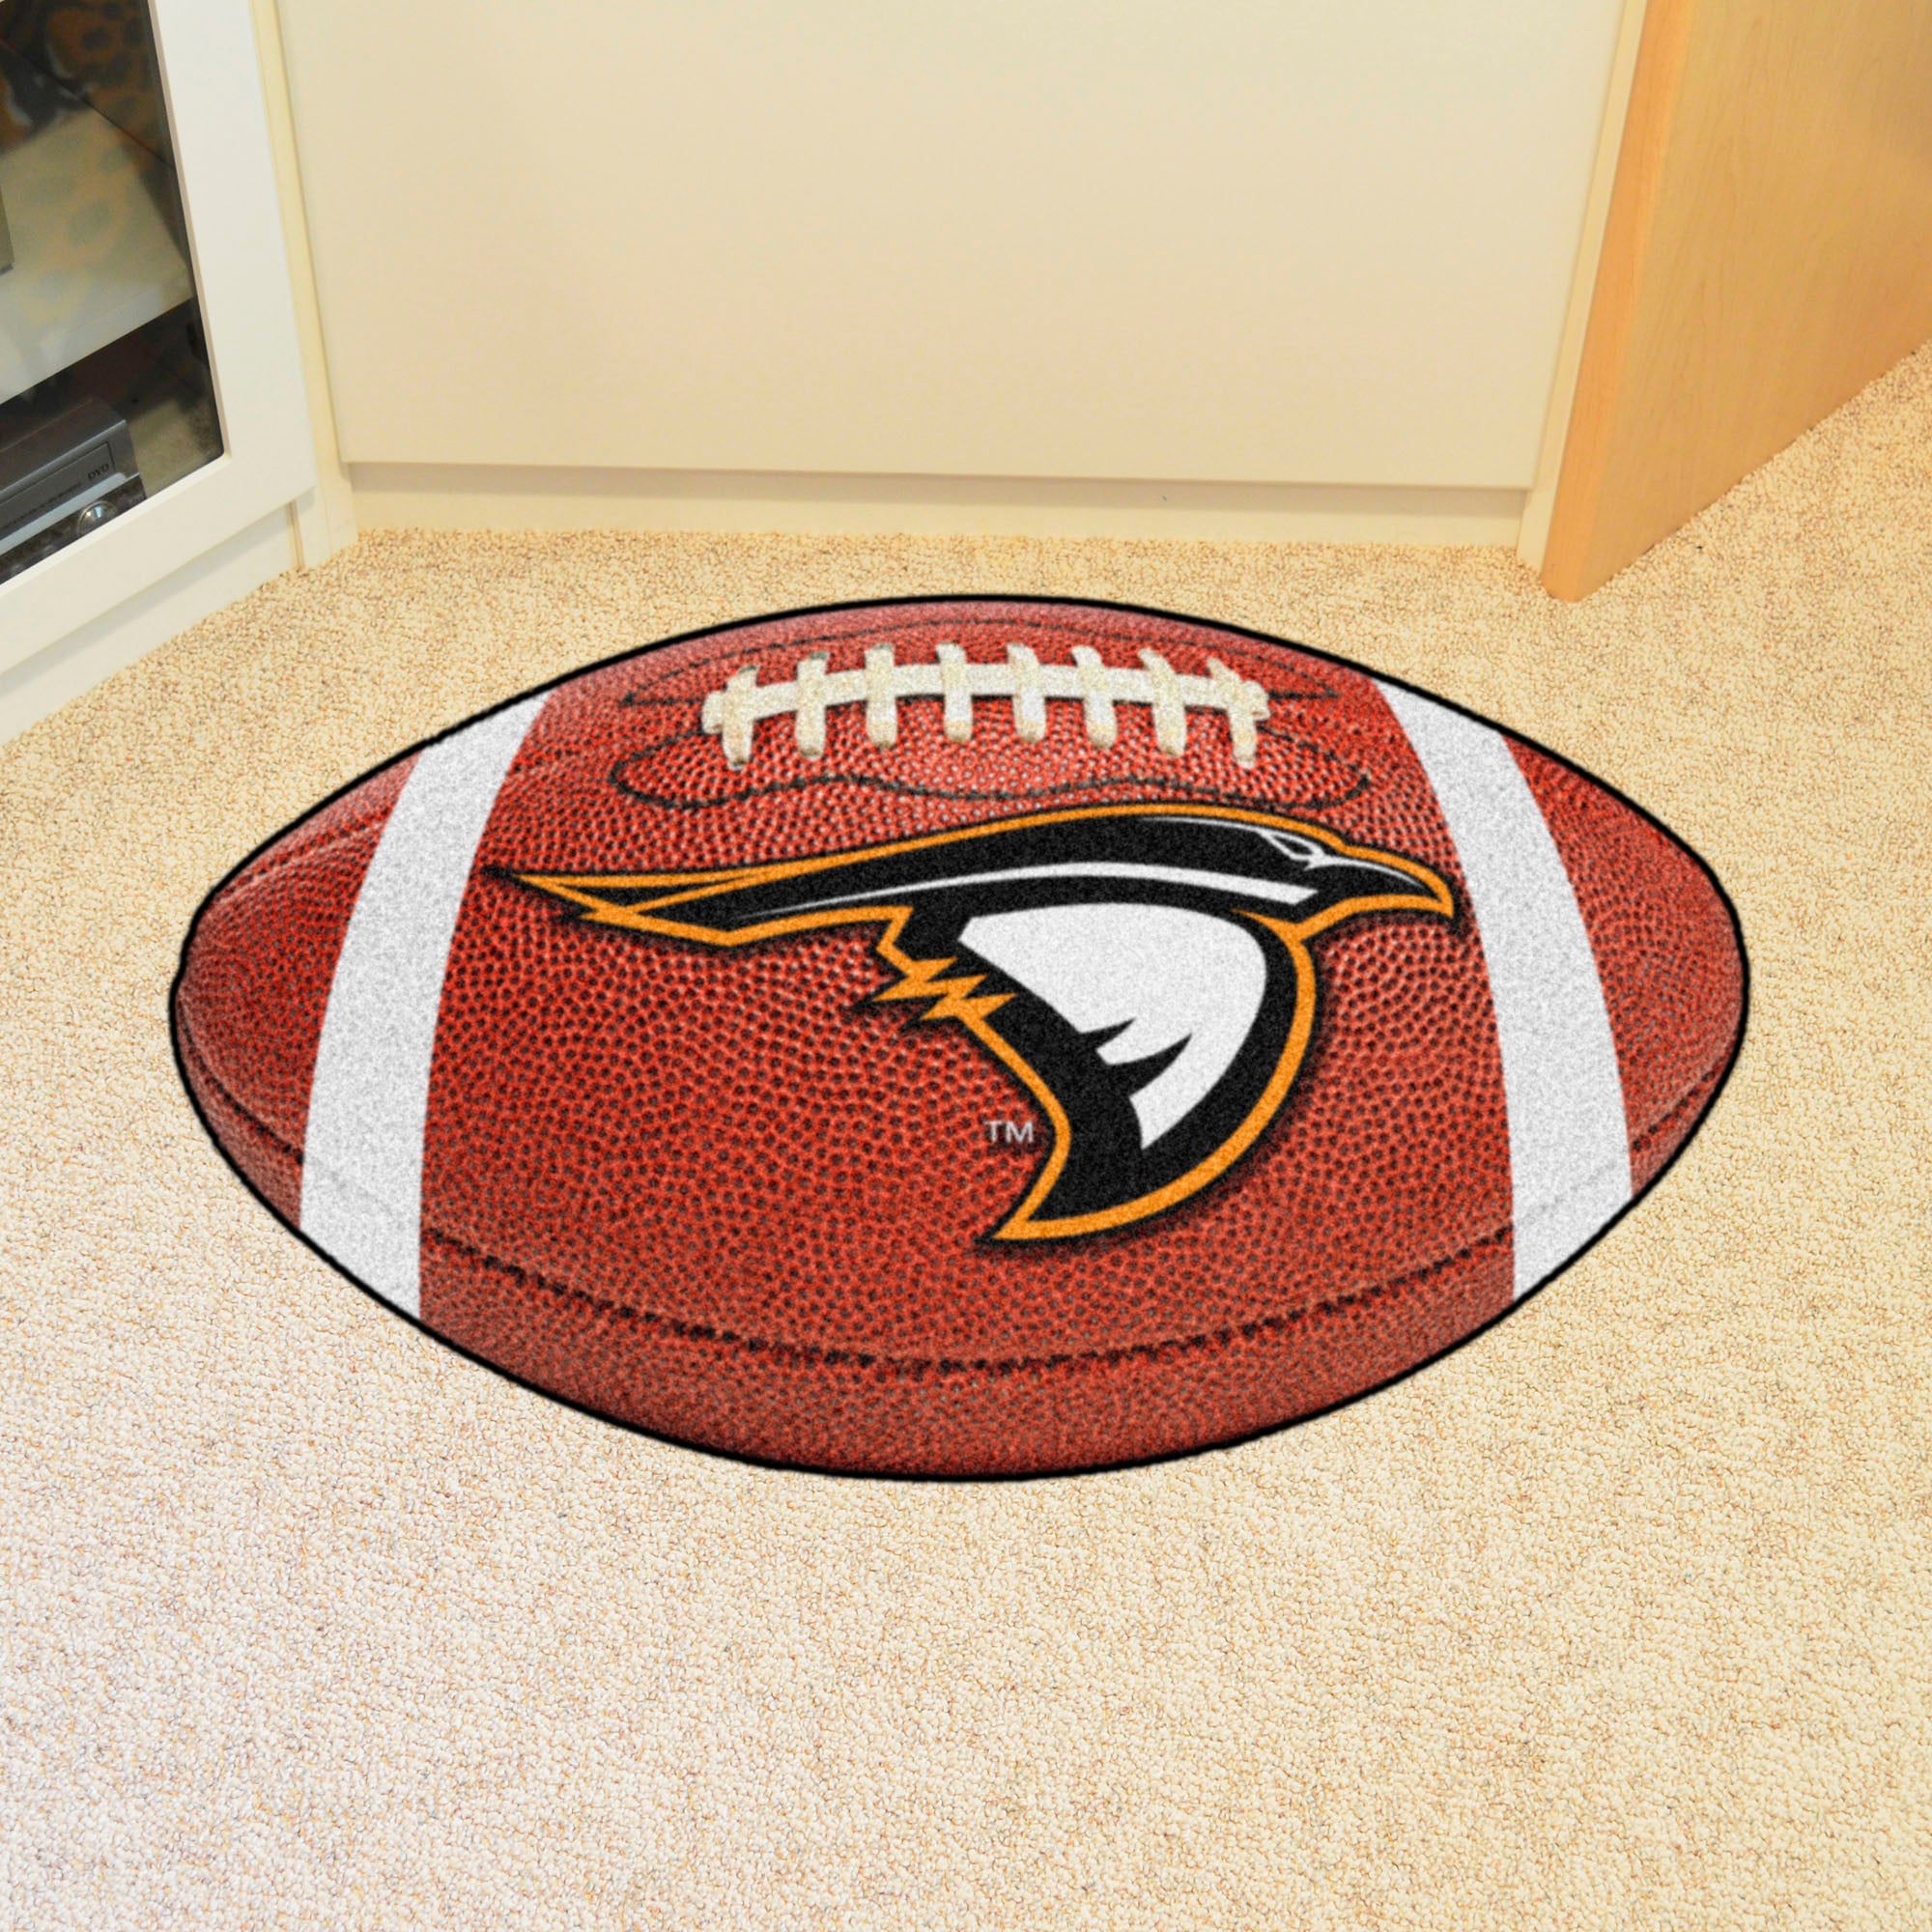 FANMATS, Anderson University (IN) Football Rug - 20.5in. x 32.5in.